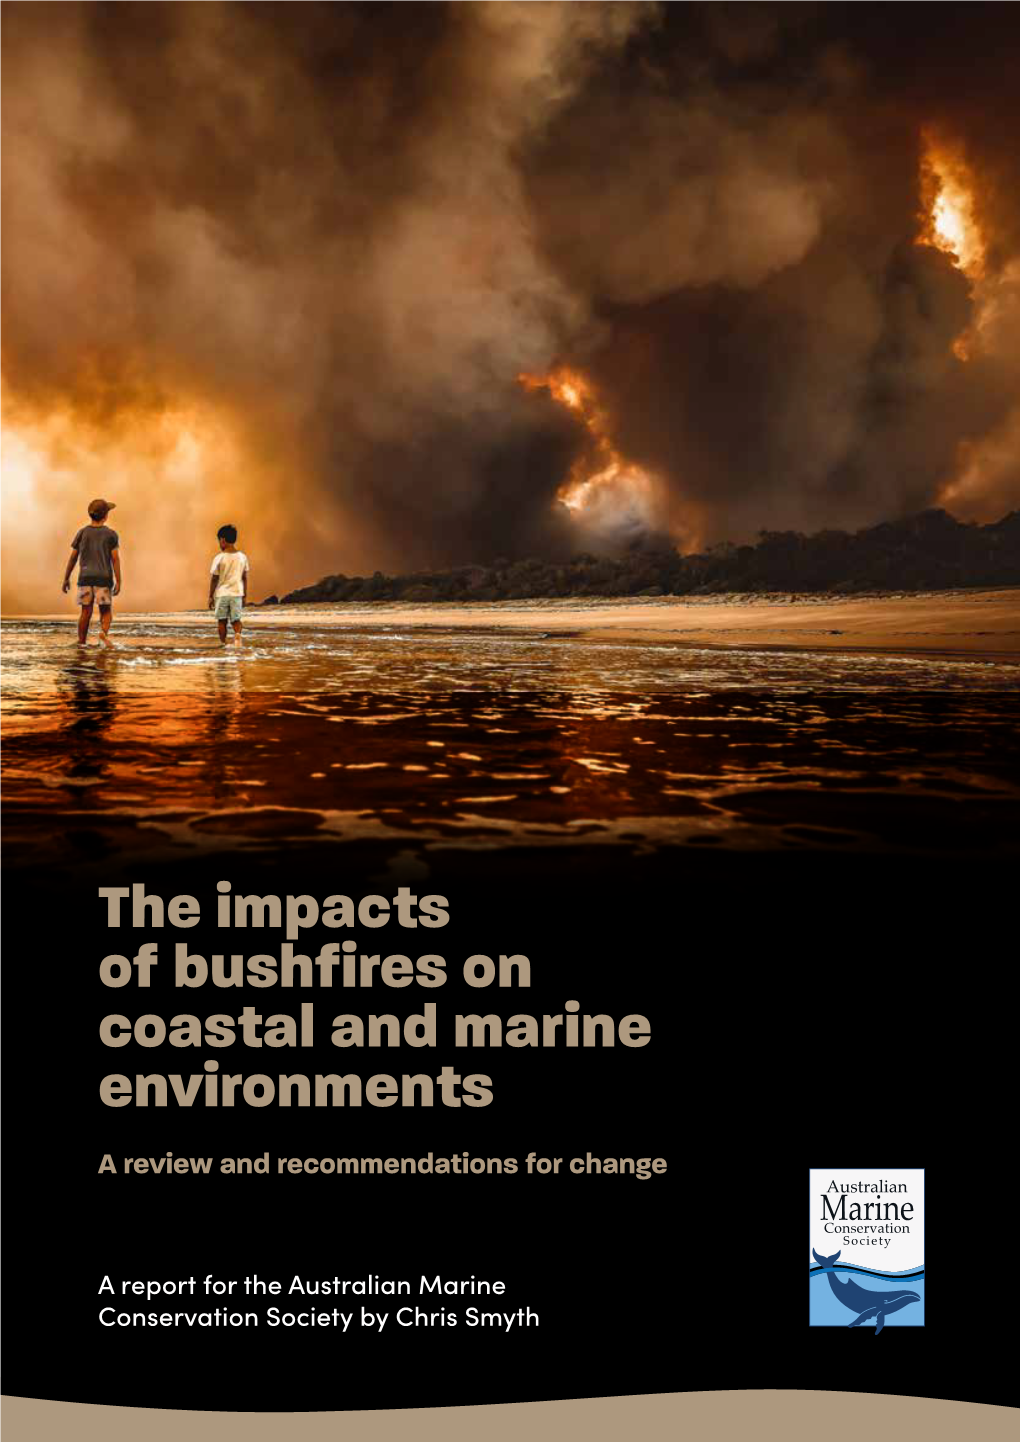 The Impacts of Bushfires on Coastal and Marine Environments a Review and Recommendations for Change